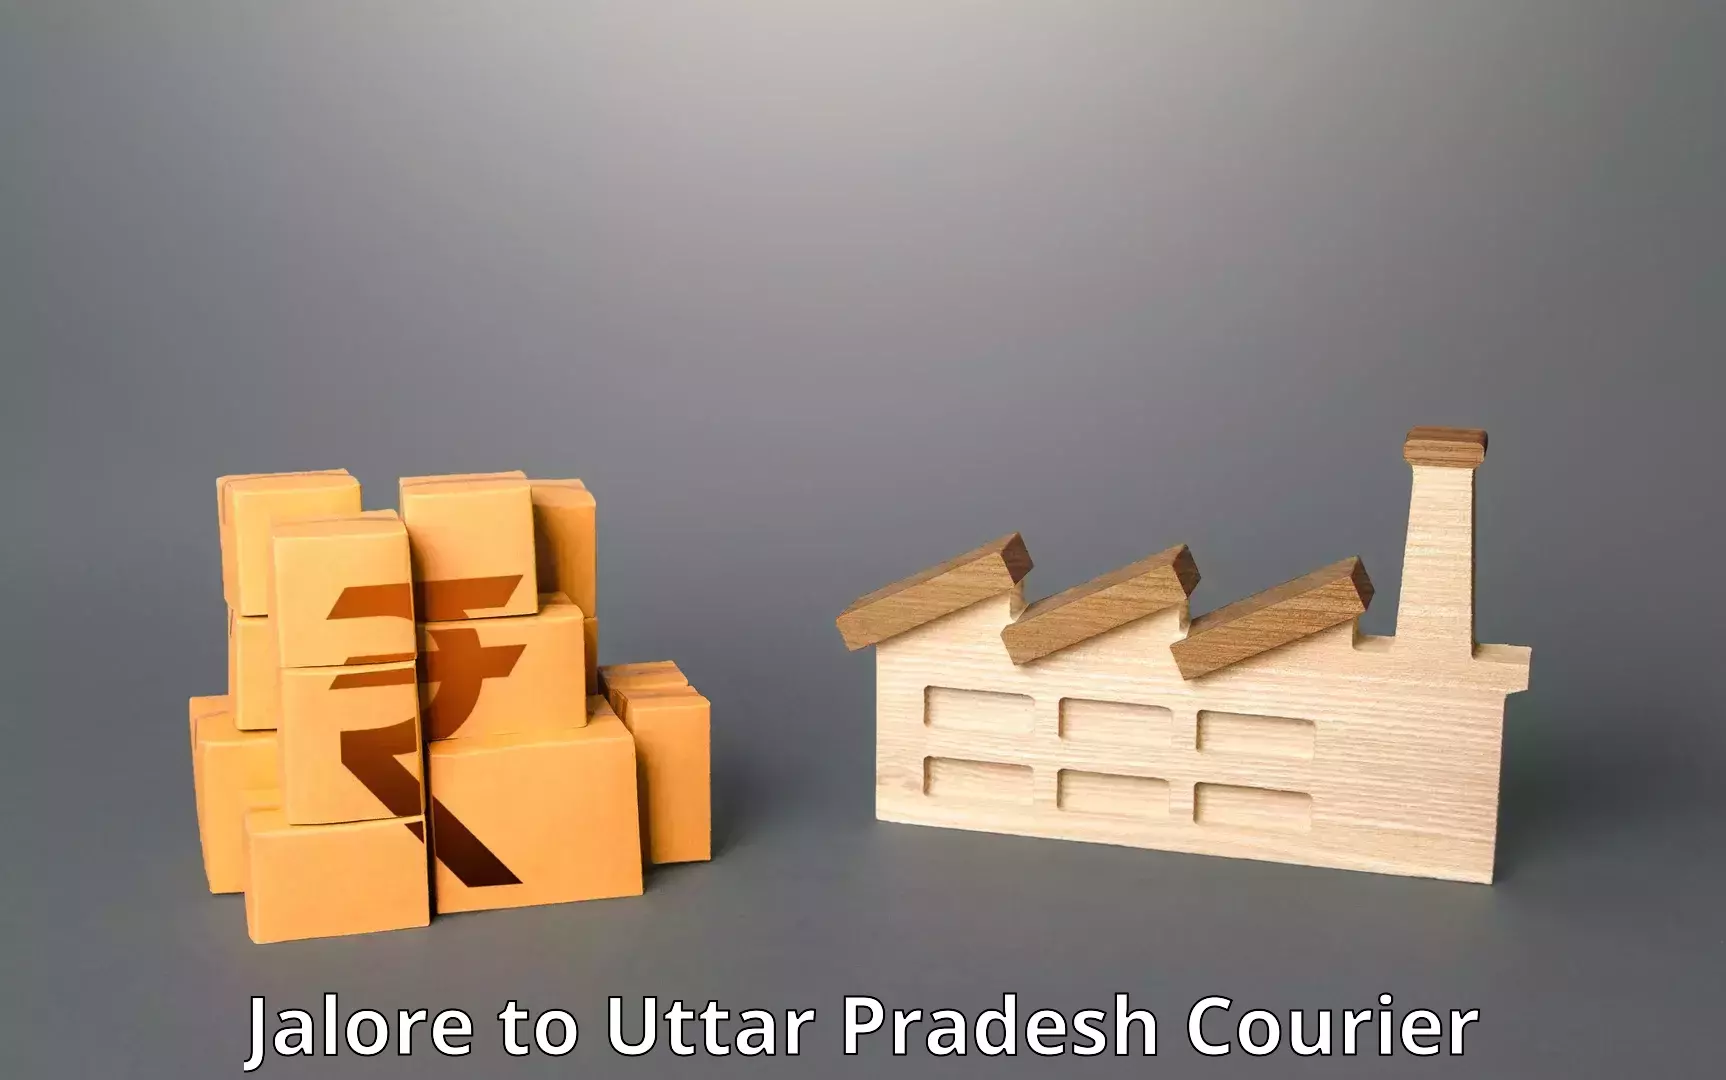 Flexible shipping options Jalore to Lucknow